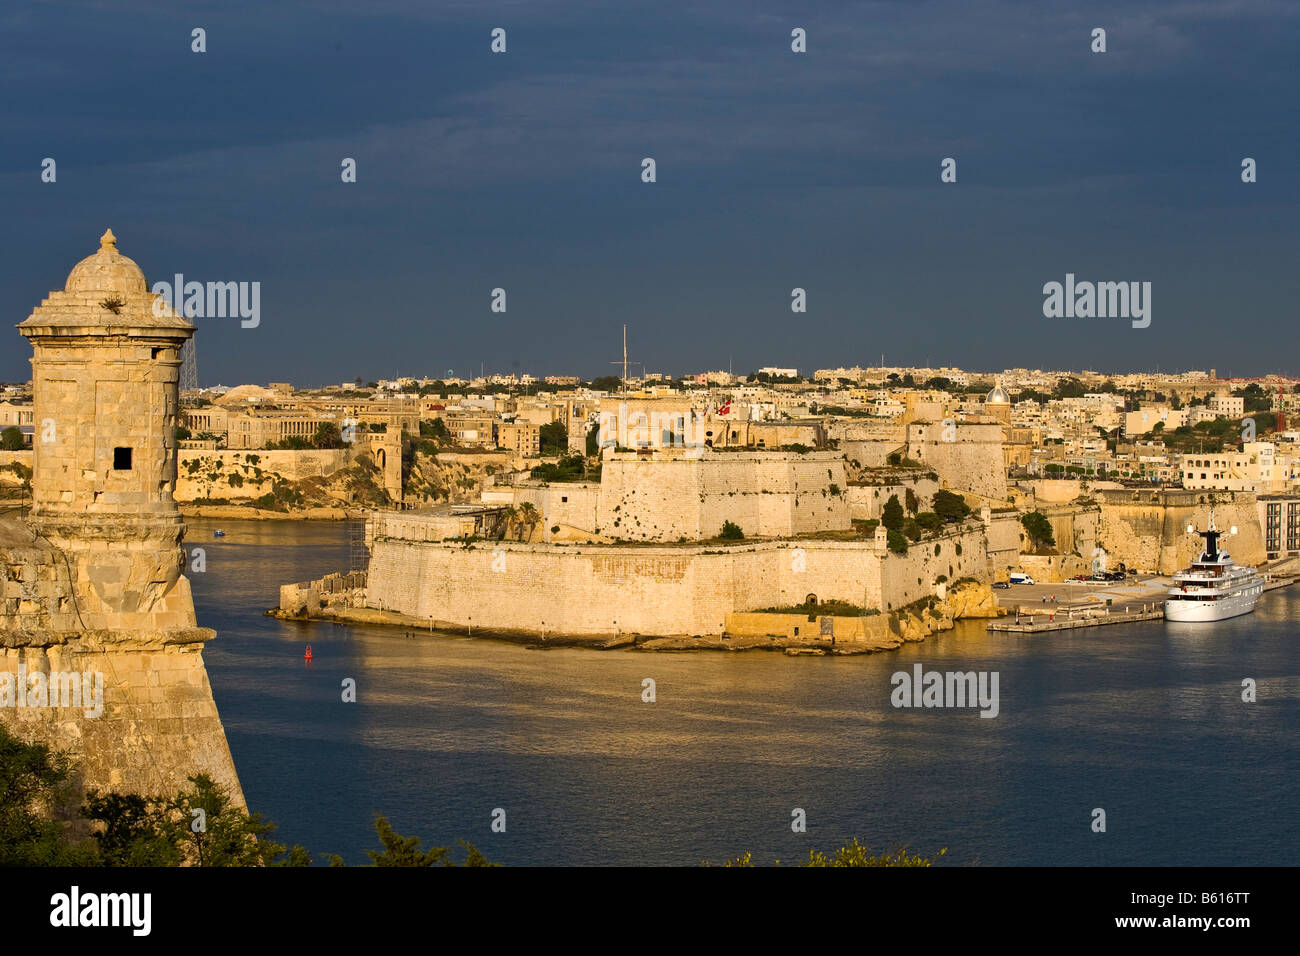 Tower of Fort San Elmo, La Valletta and Fort San Angelo, Vittoriosa, The Three Cities from La Valletta with Grand Harbour, Malta Stock Photo